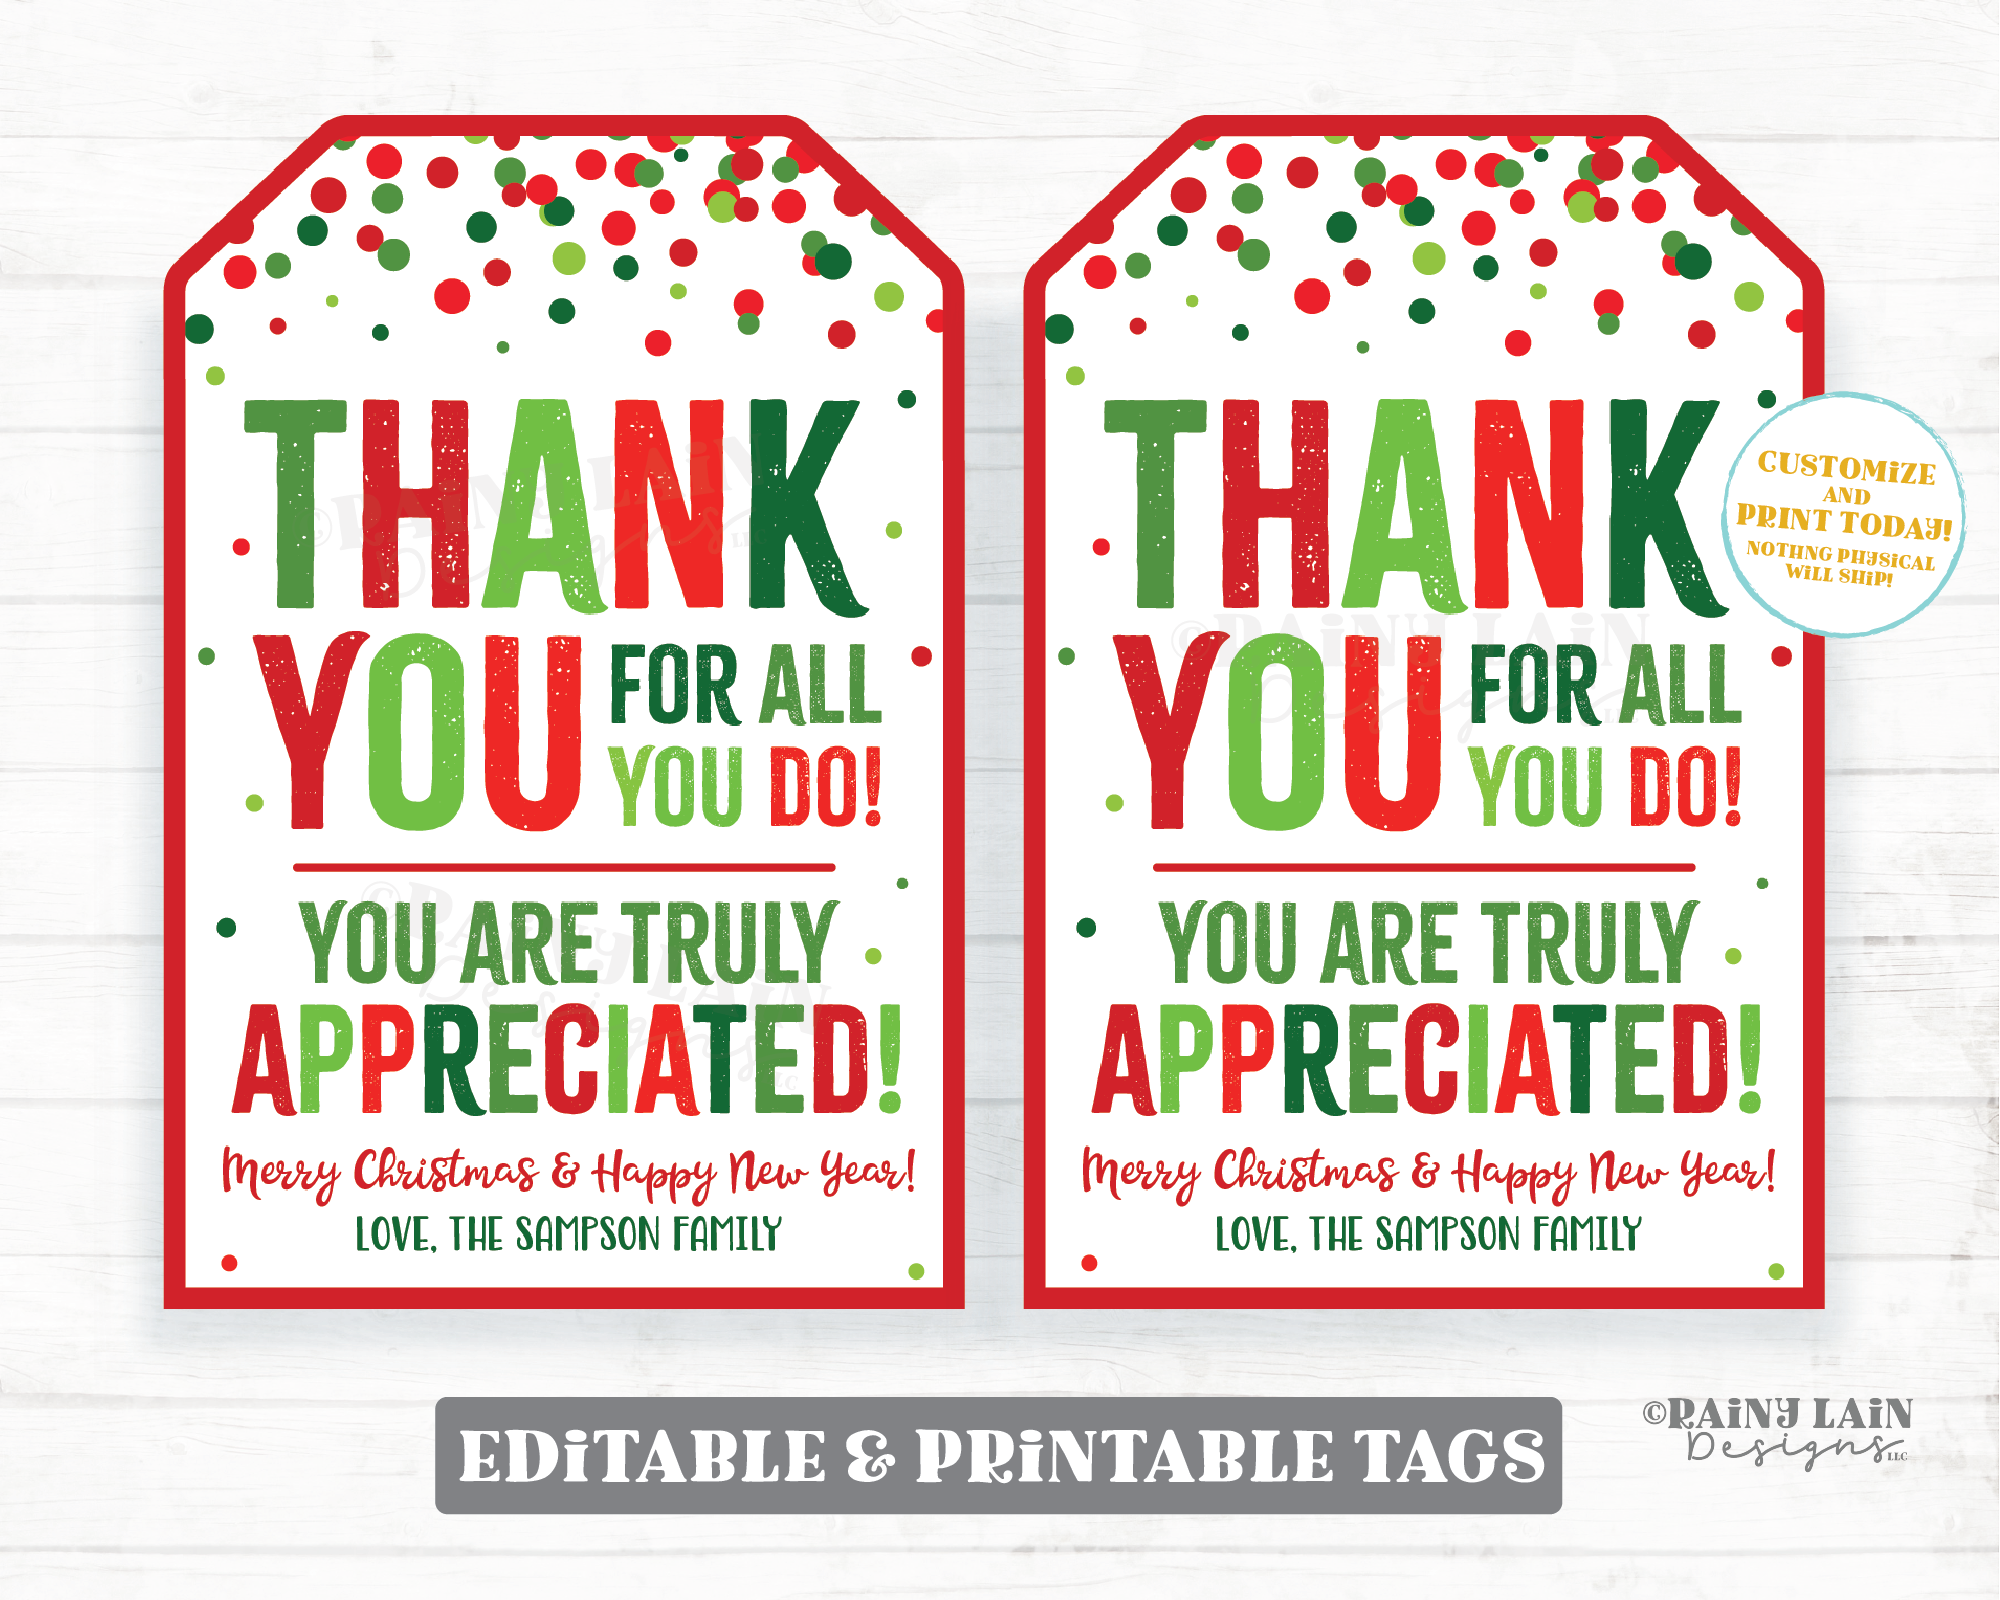 Thank you for all you do You are truly Appreciated Gift Tag Christmas Tags Employee Appreciation Company Essential Staff Teacher PTO School